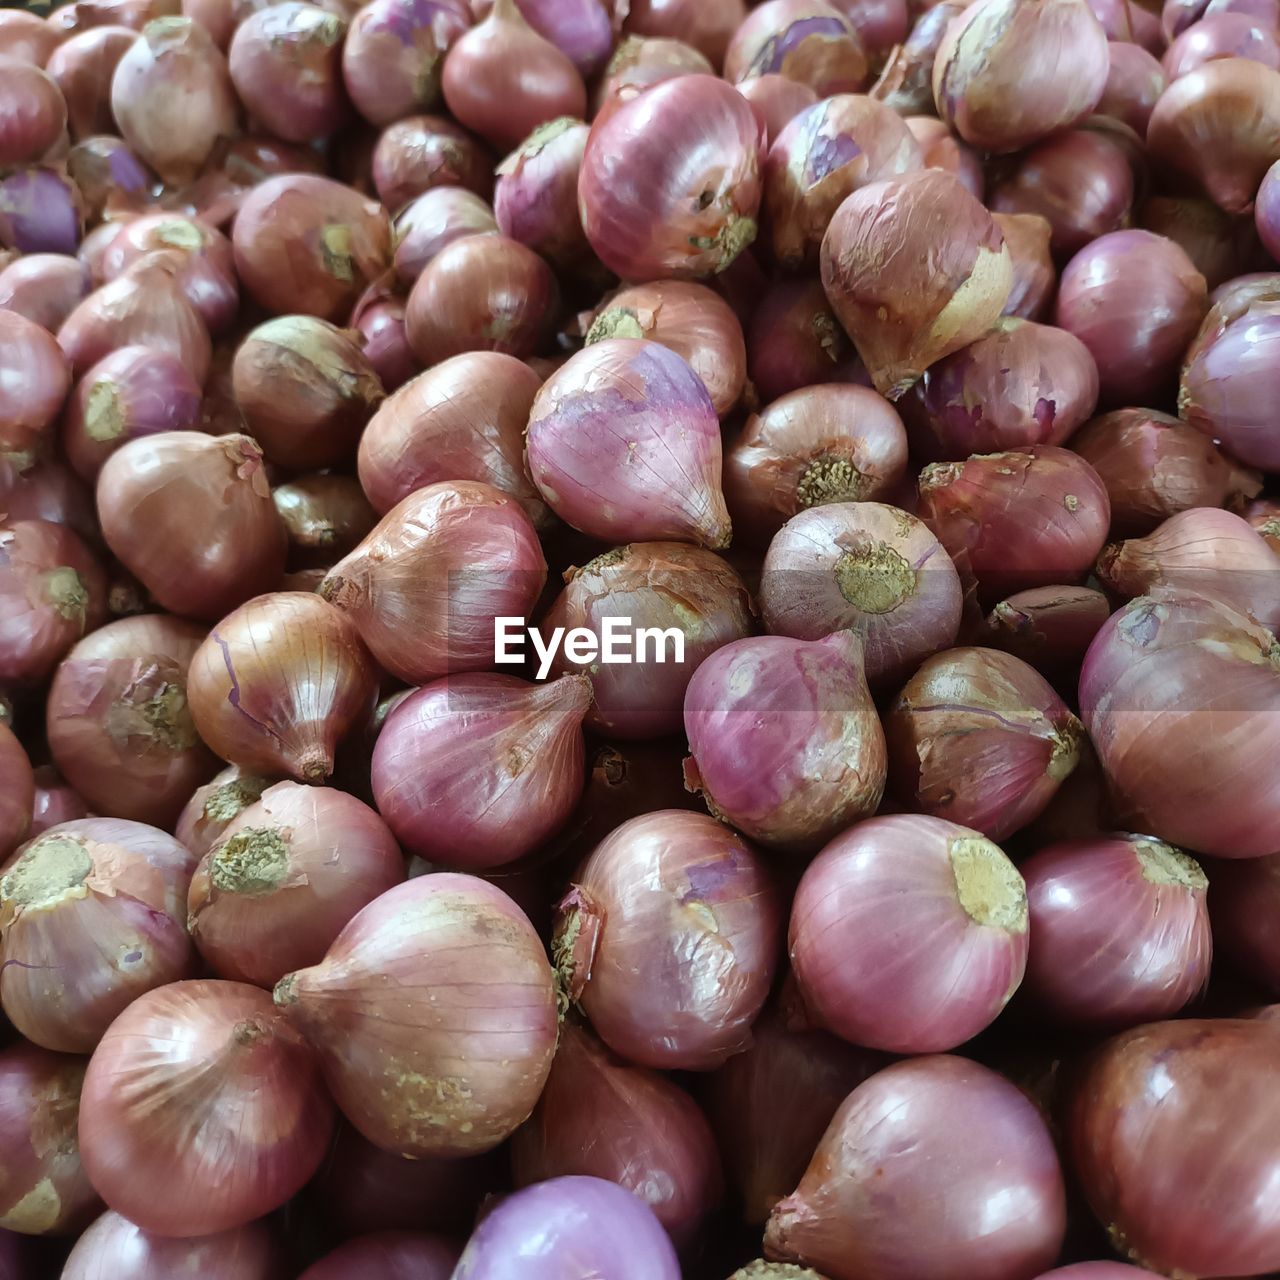 shallot, red onion, food and drink, food, onion, freshness, vegetable, wellbeing, plant, large group of objects, healthy eating, produce, abundance, full frame, backgrounds, no people, still life, market, close-up, for sale, garlic, raw food, ingredient, retail, high angle view, day, market stall, pink, organic, indoors, directly above, spice